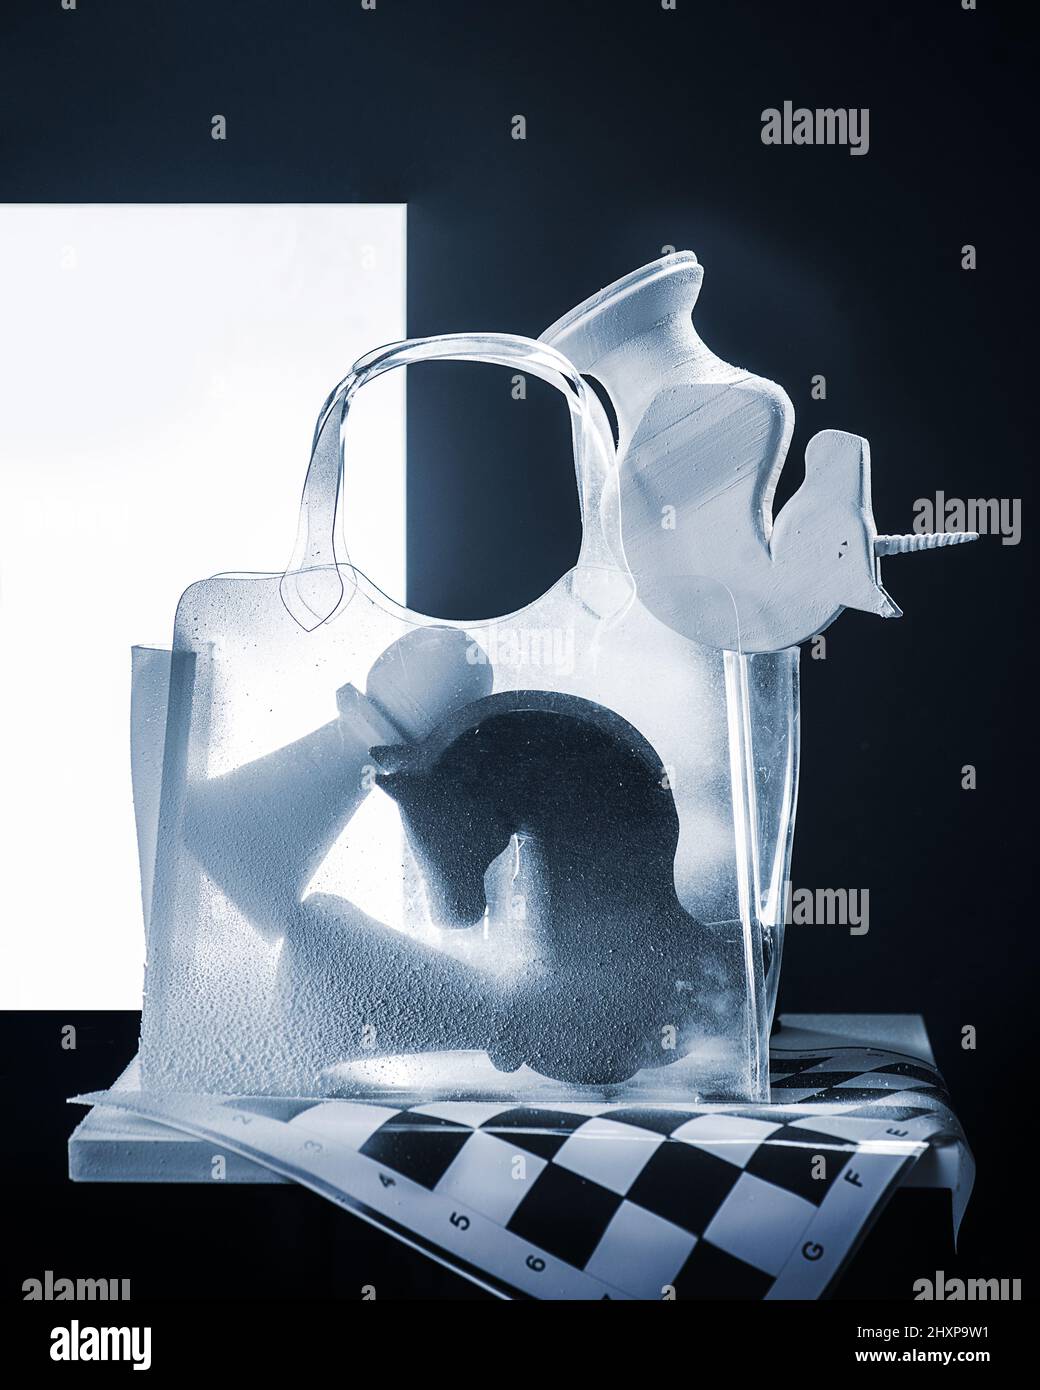 Chess concept, giant chess figures in a transparent bag, high contrast black and white still life Stock Photo